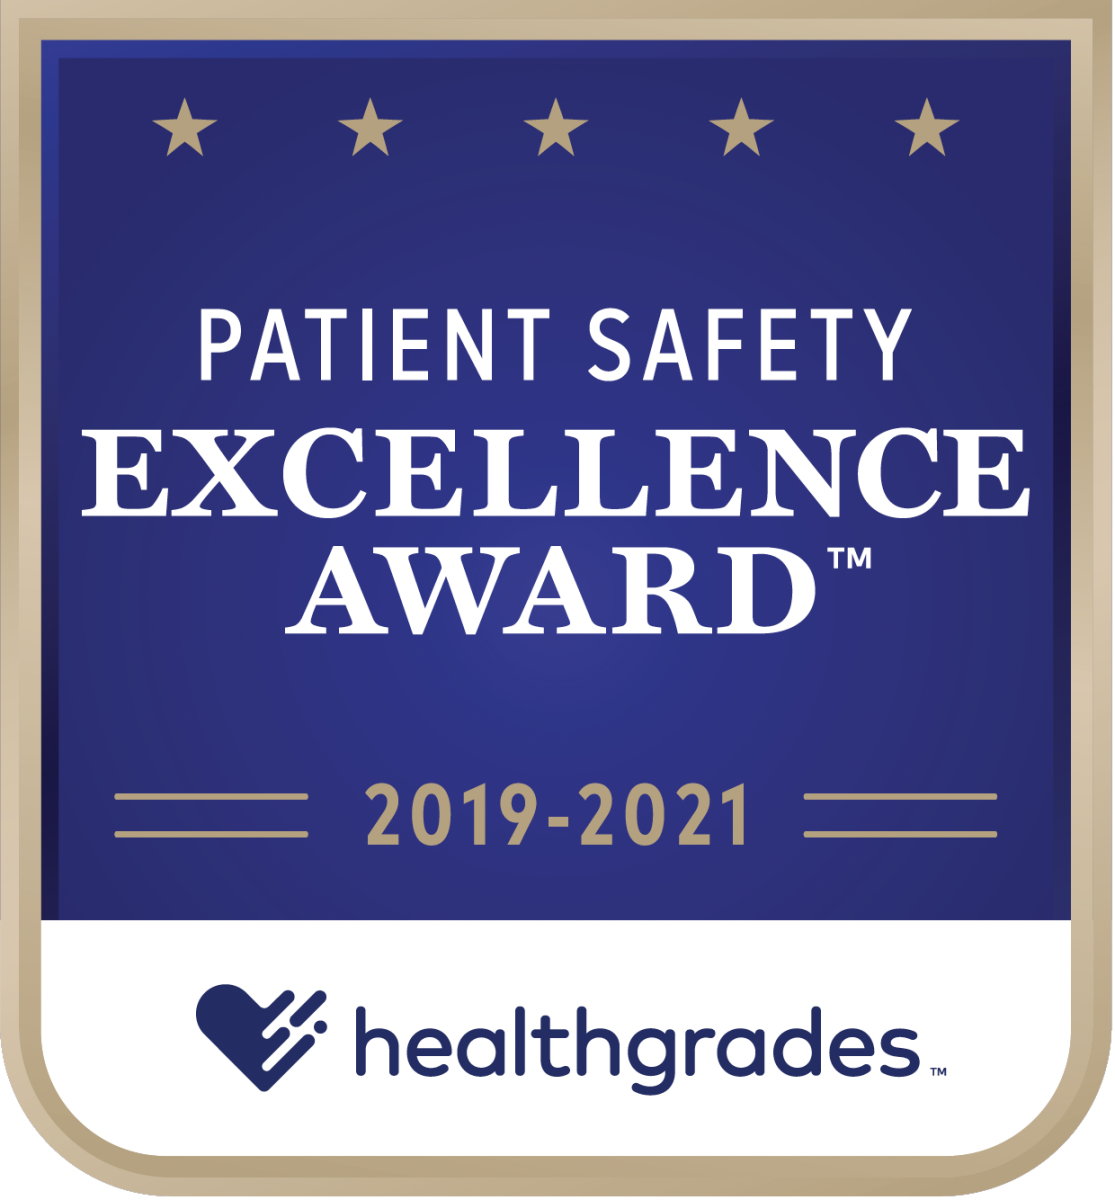 Patient safety excellence award badge